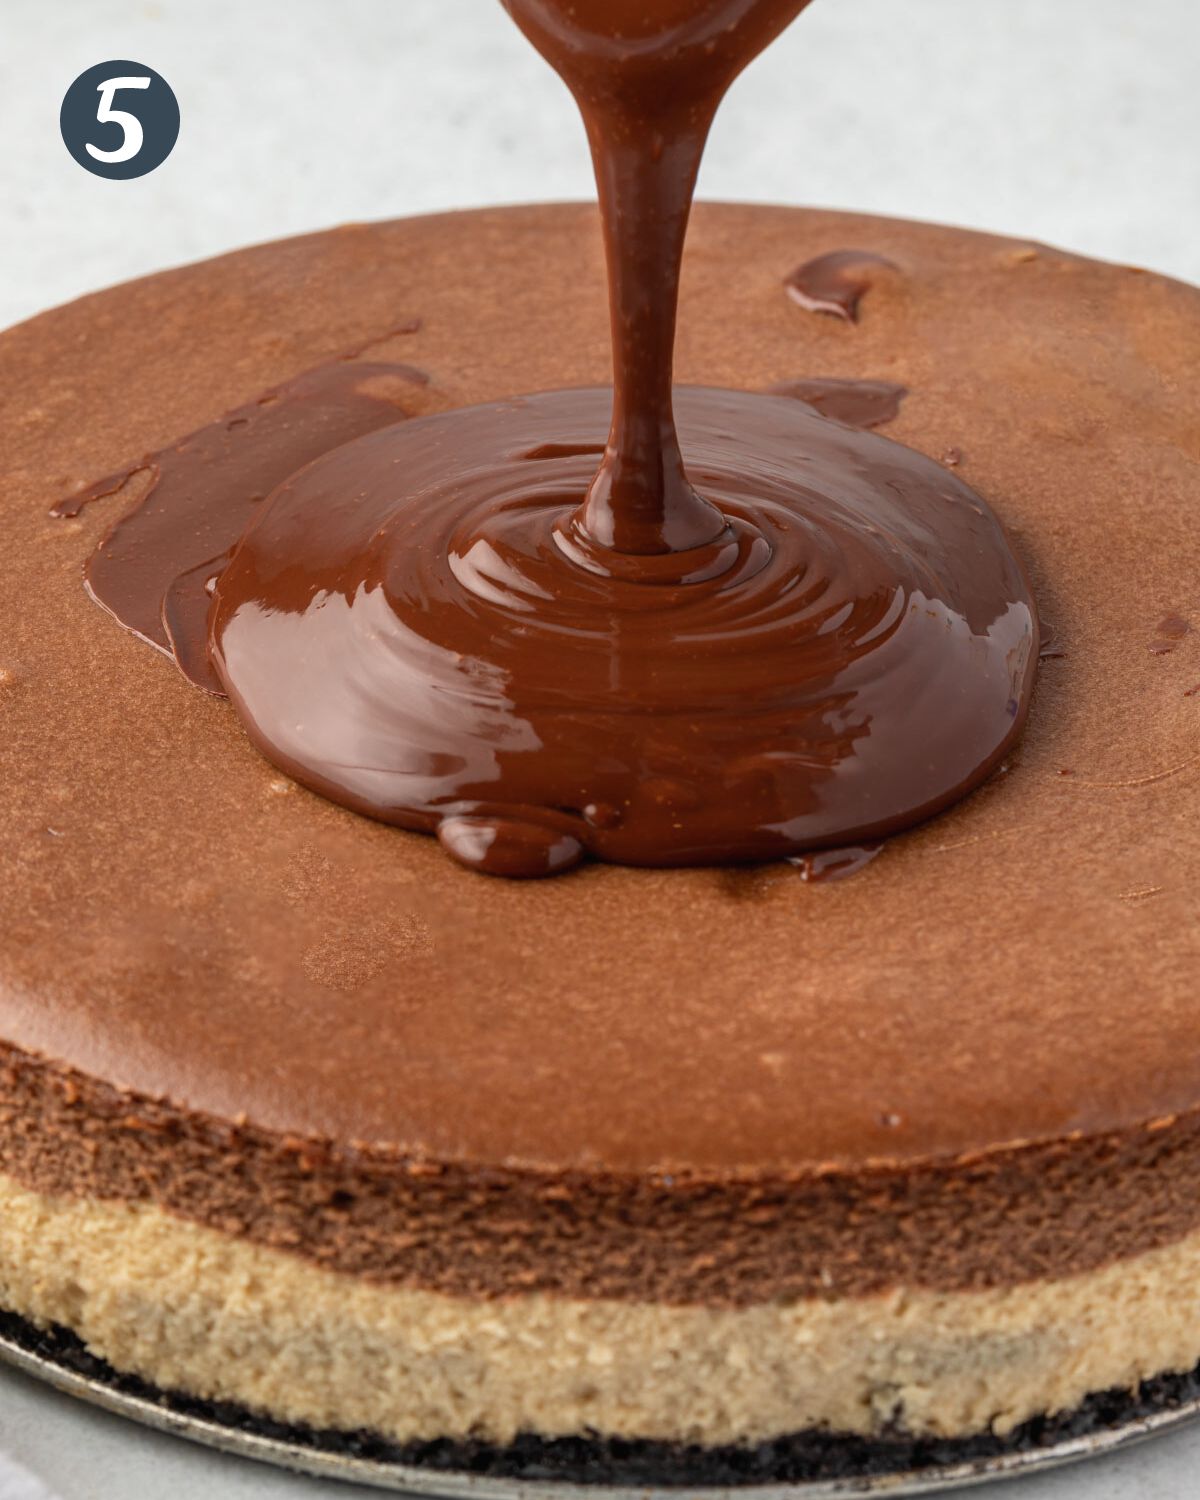 Chocolate ganache poured on top of the cheesecake, with a ring of ganache pooling in the center.